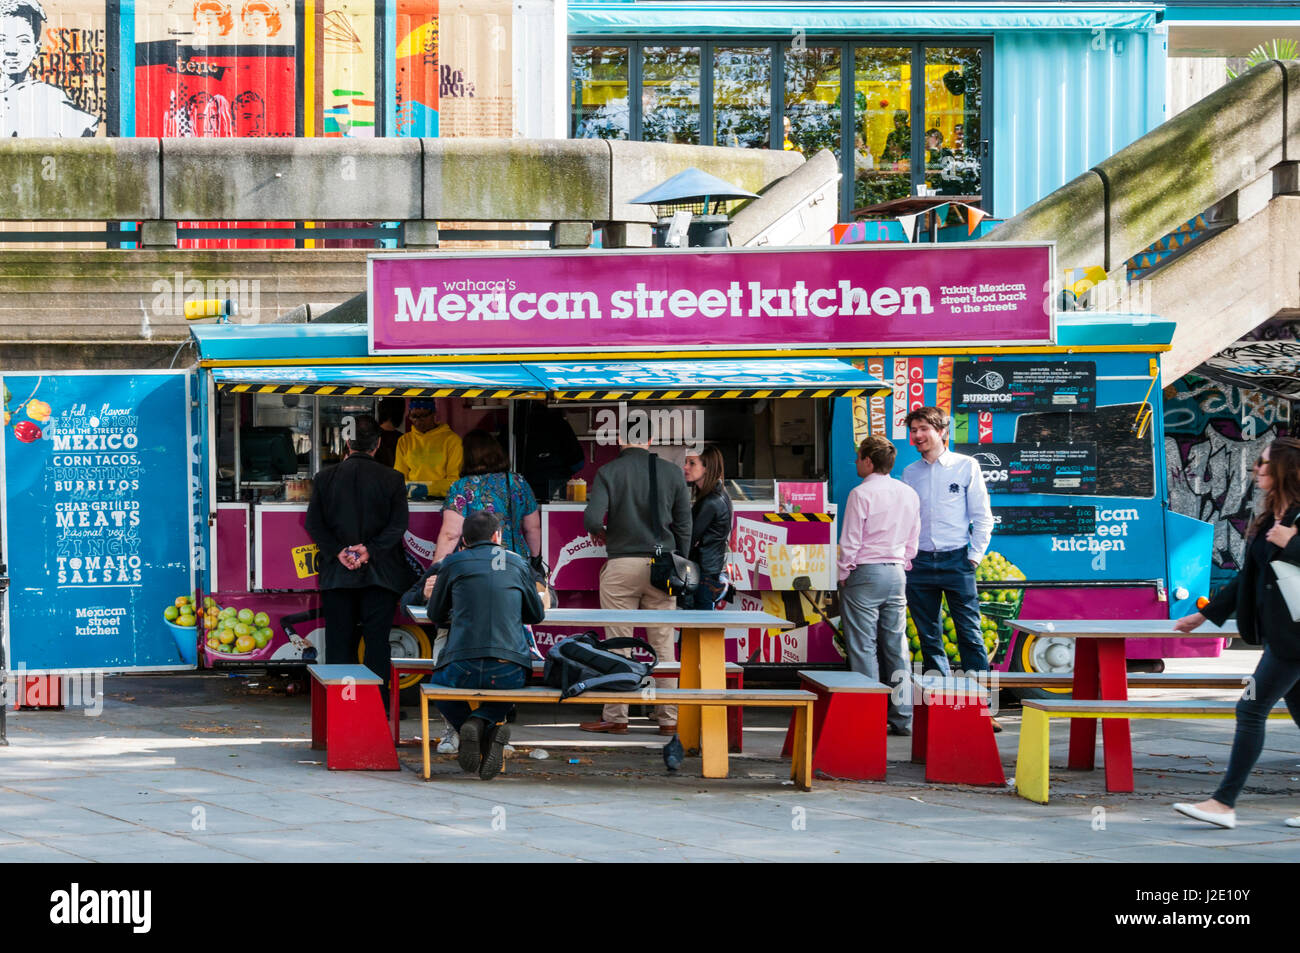 Wahaca's Mexican Street Kitchen on London's South Bank. Stock Photo